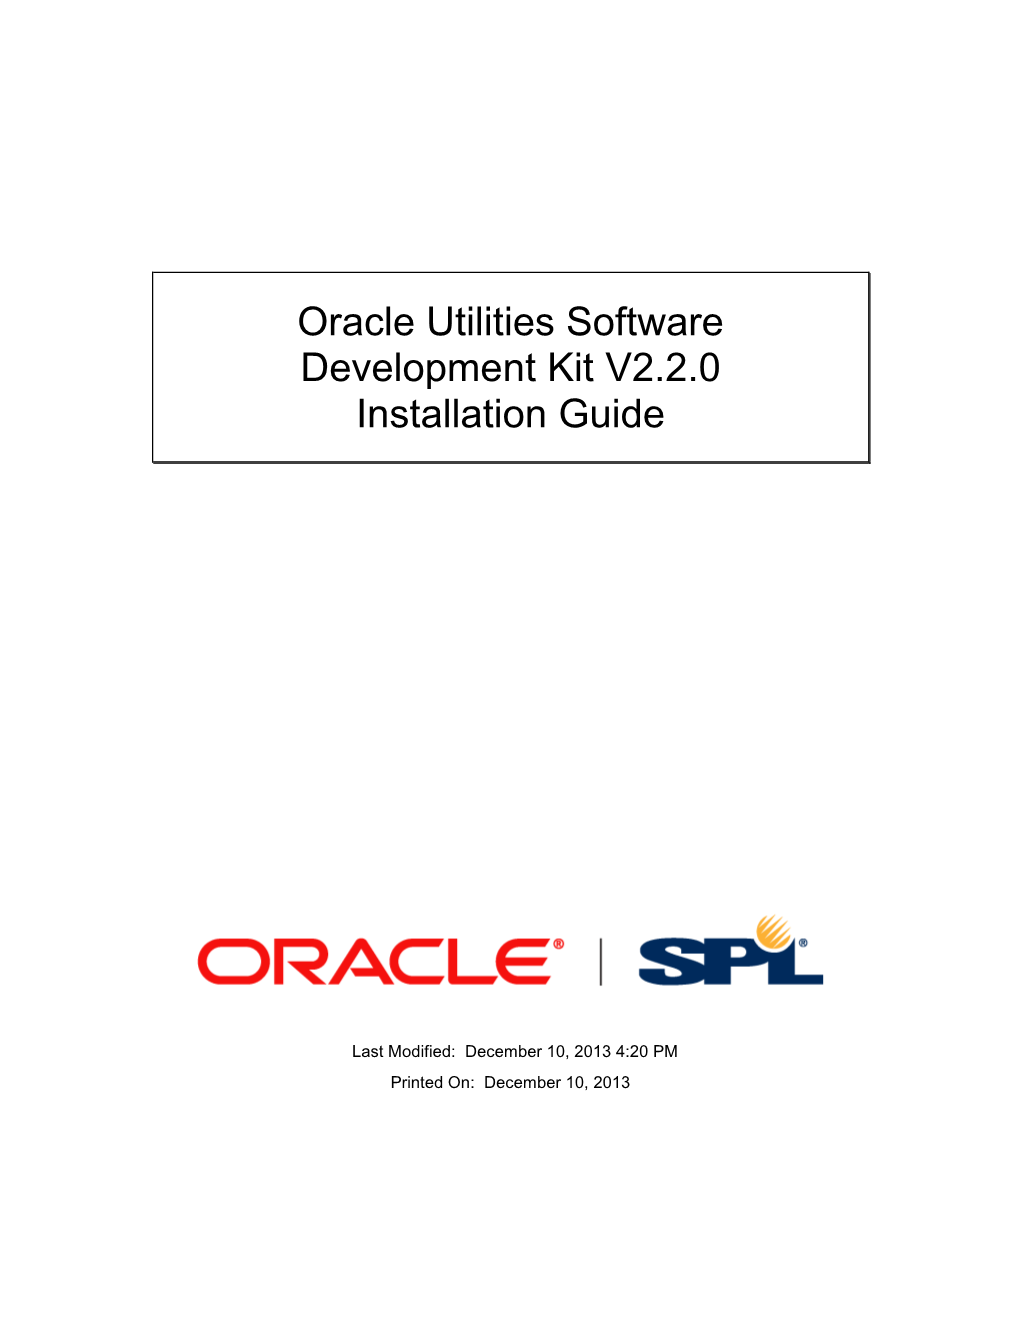 Oracle Utilities Software Development Kit V2.2.0 Installation Guide